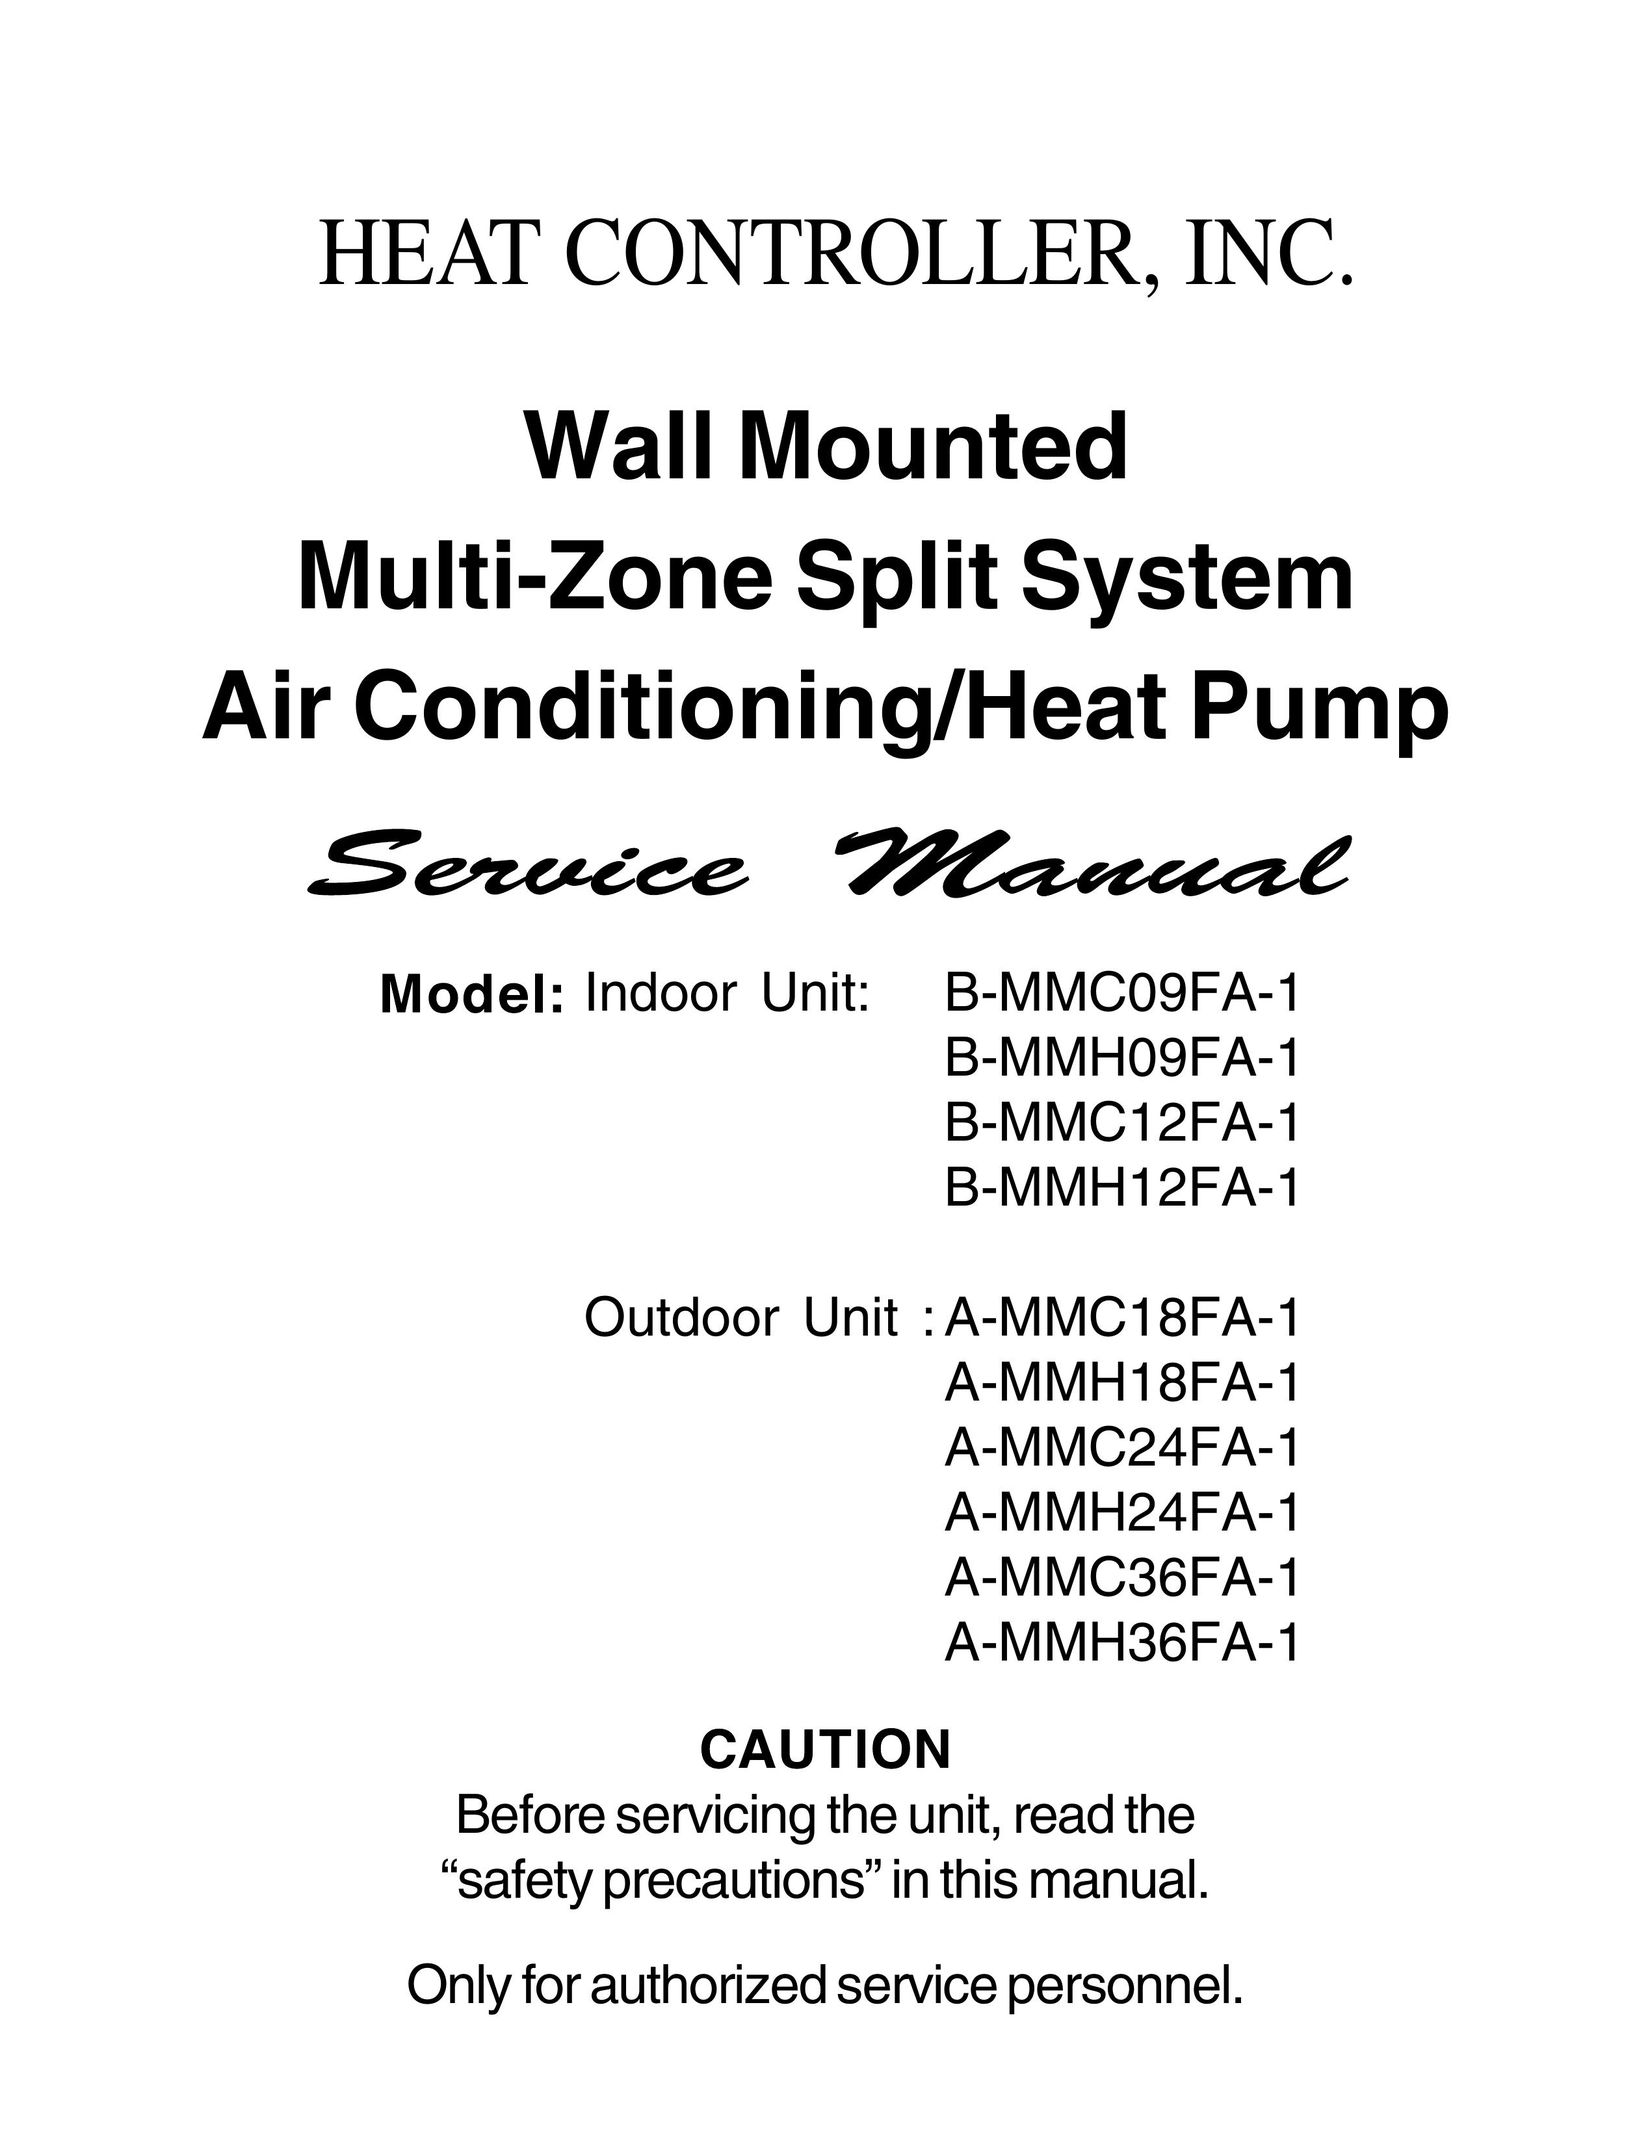 Heat Controller A-MMH24FA-1 Air Conditioner User Manual